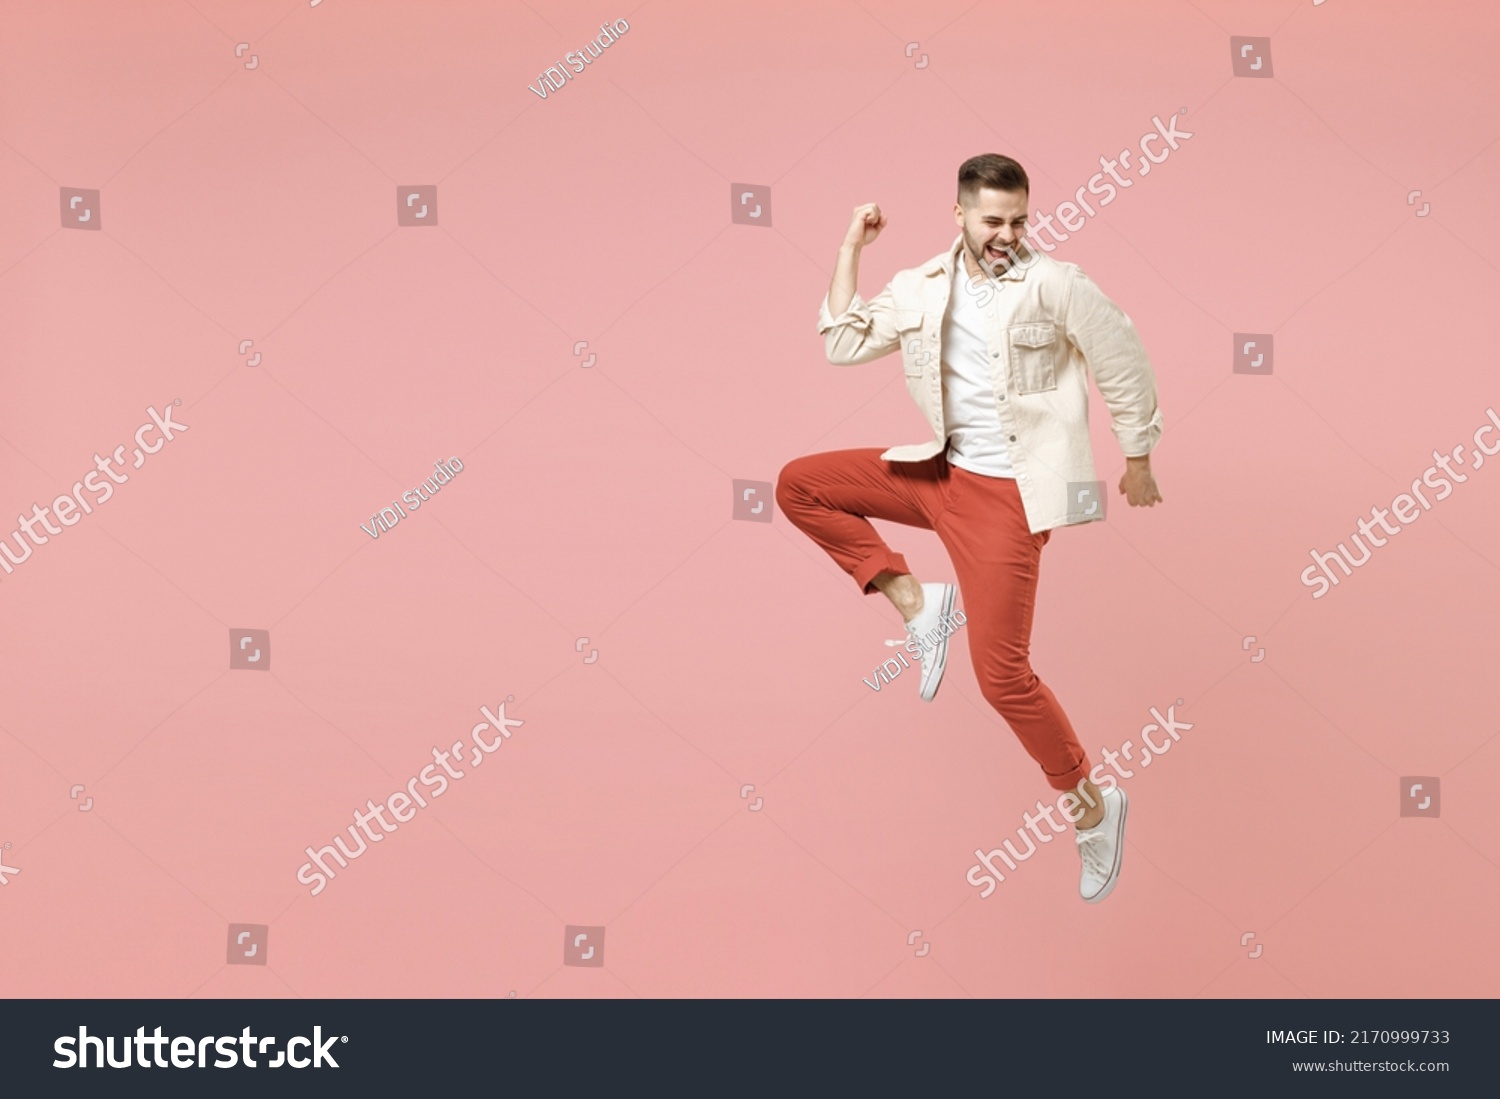 Full length young happy overjoyed fun trendy fashionable caucasian man 20s in jacket white t-shirt jump do winner gesture clench fist celebrating isolated on pastel pink background studio portrait. #2170999733